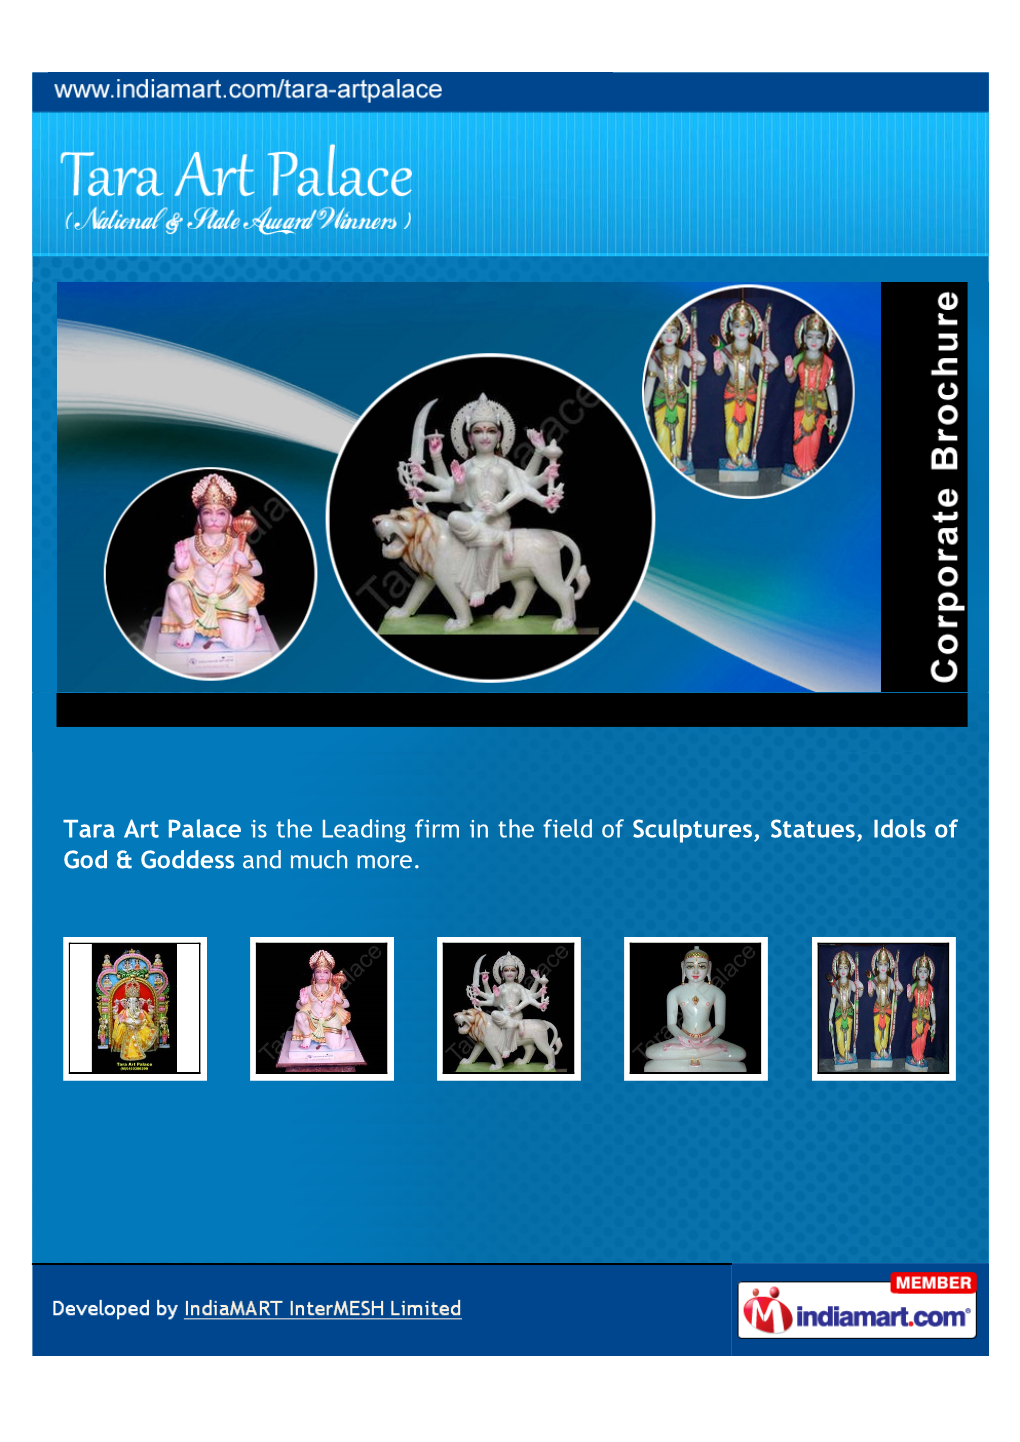 Tara Art Palace Is the Leading Firm in the Field of Sculptures, Statues, Idols of God & Goddess and Much More